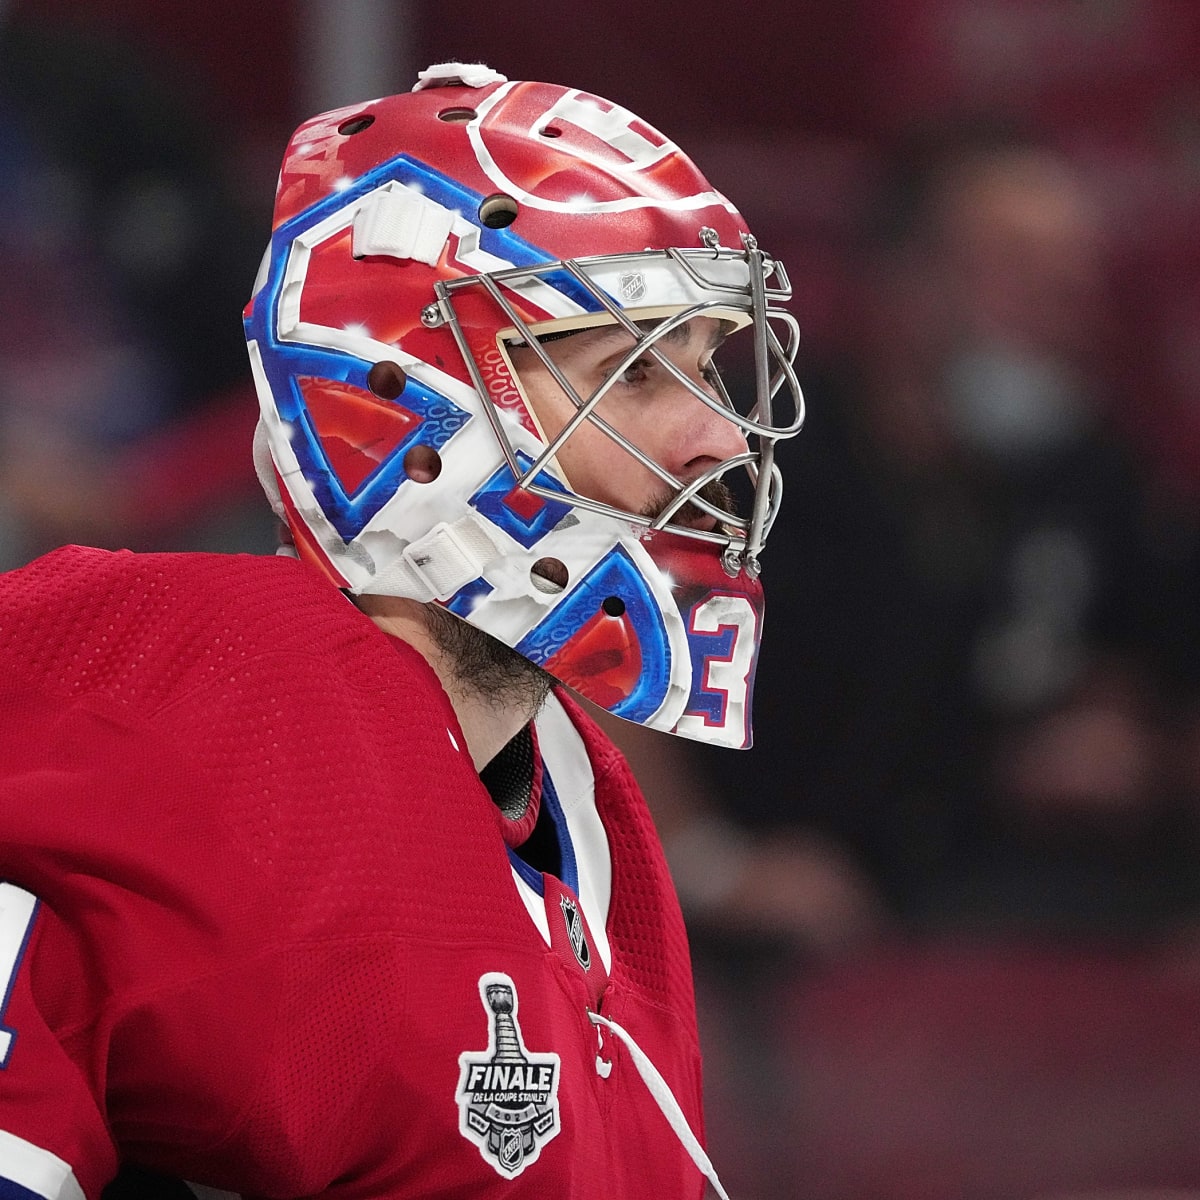 Montreal Canadiens star Carey Price entering player assistance